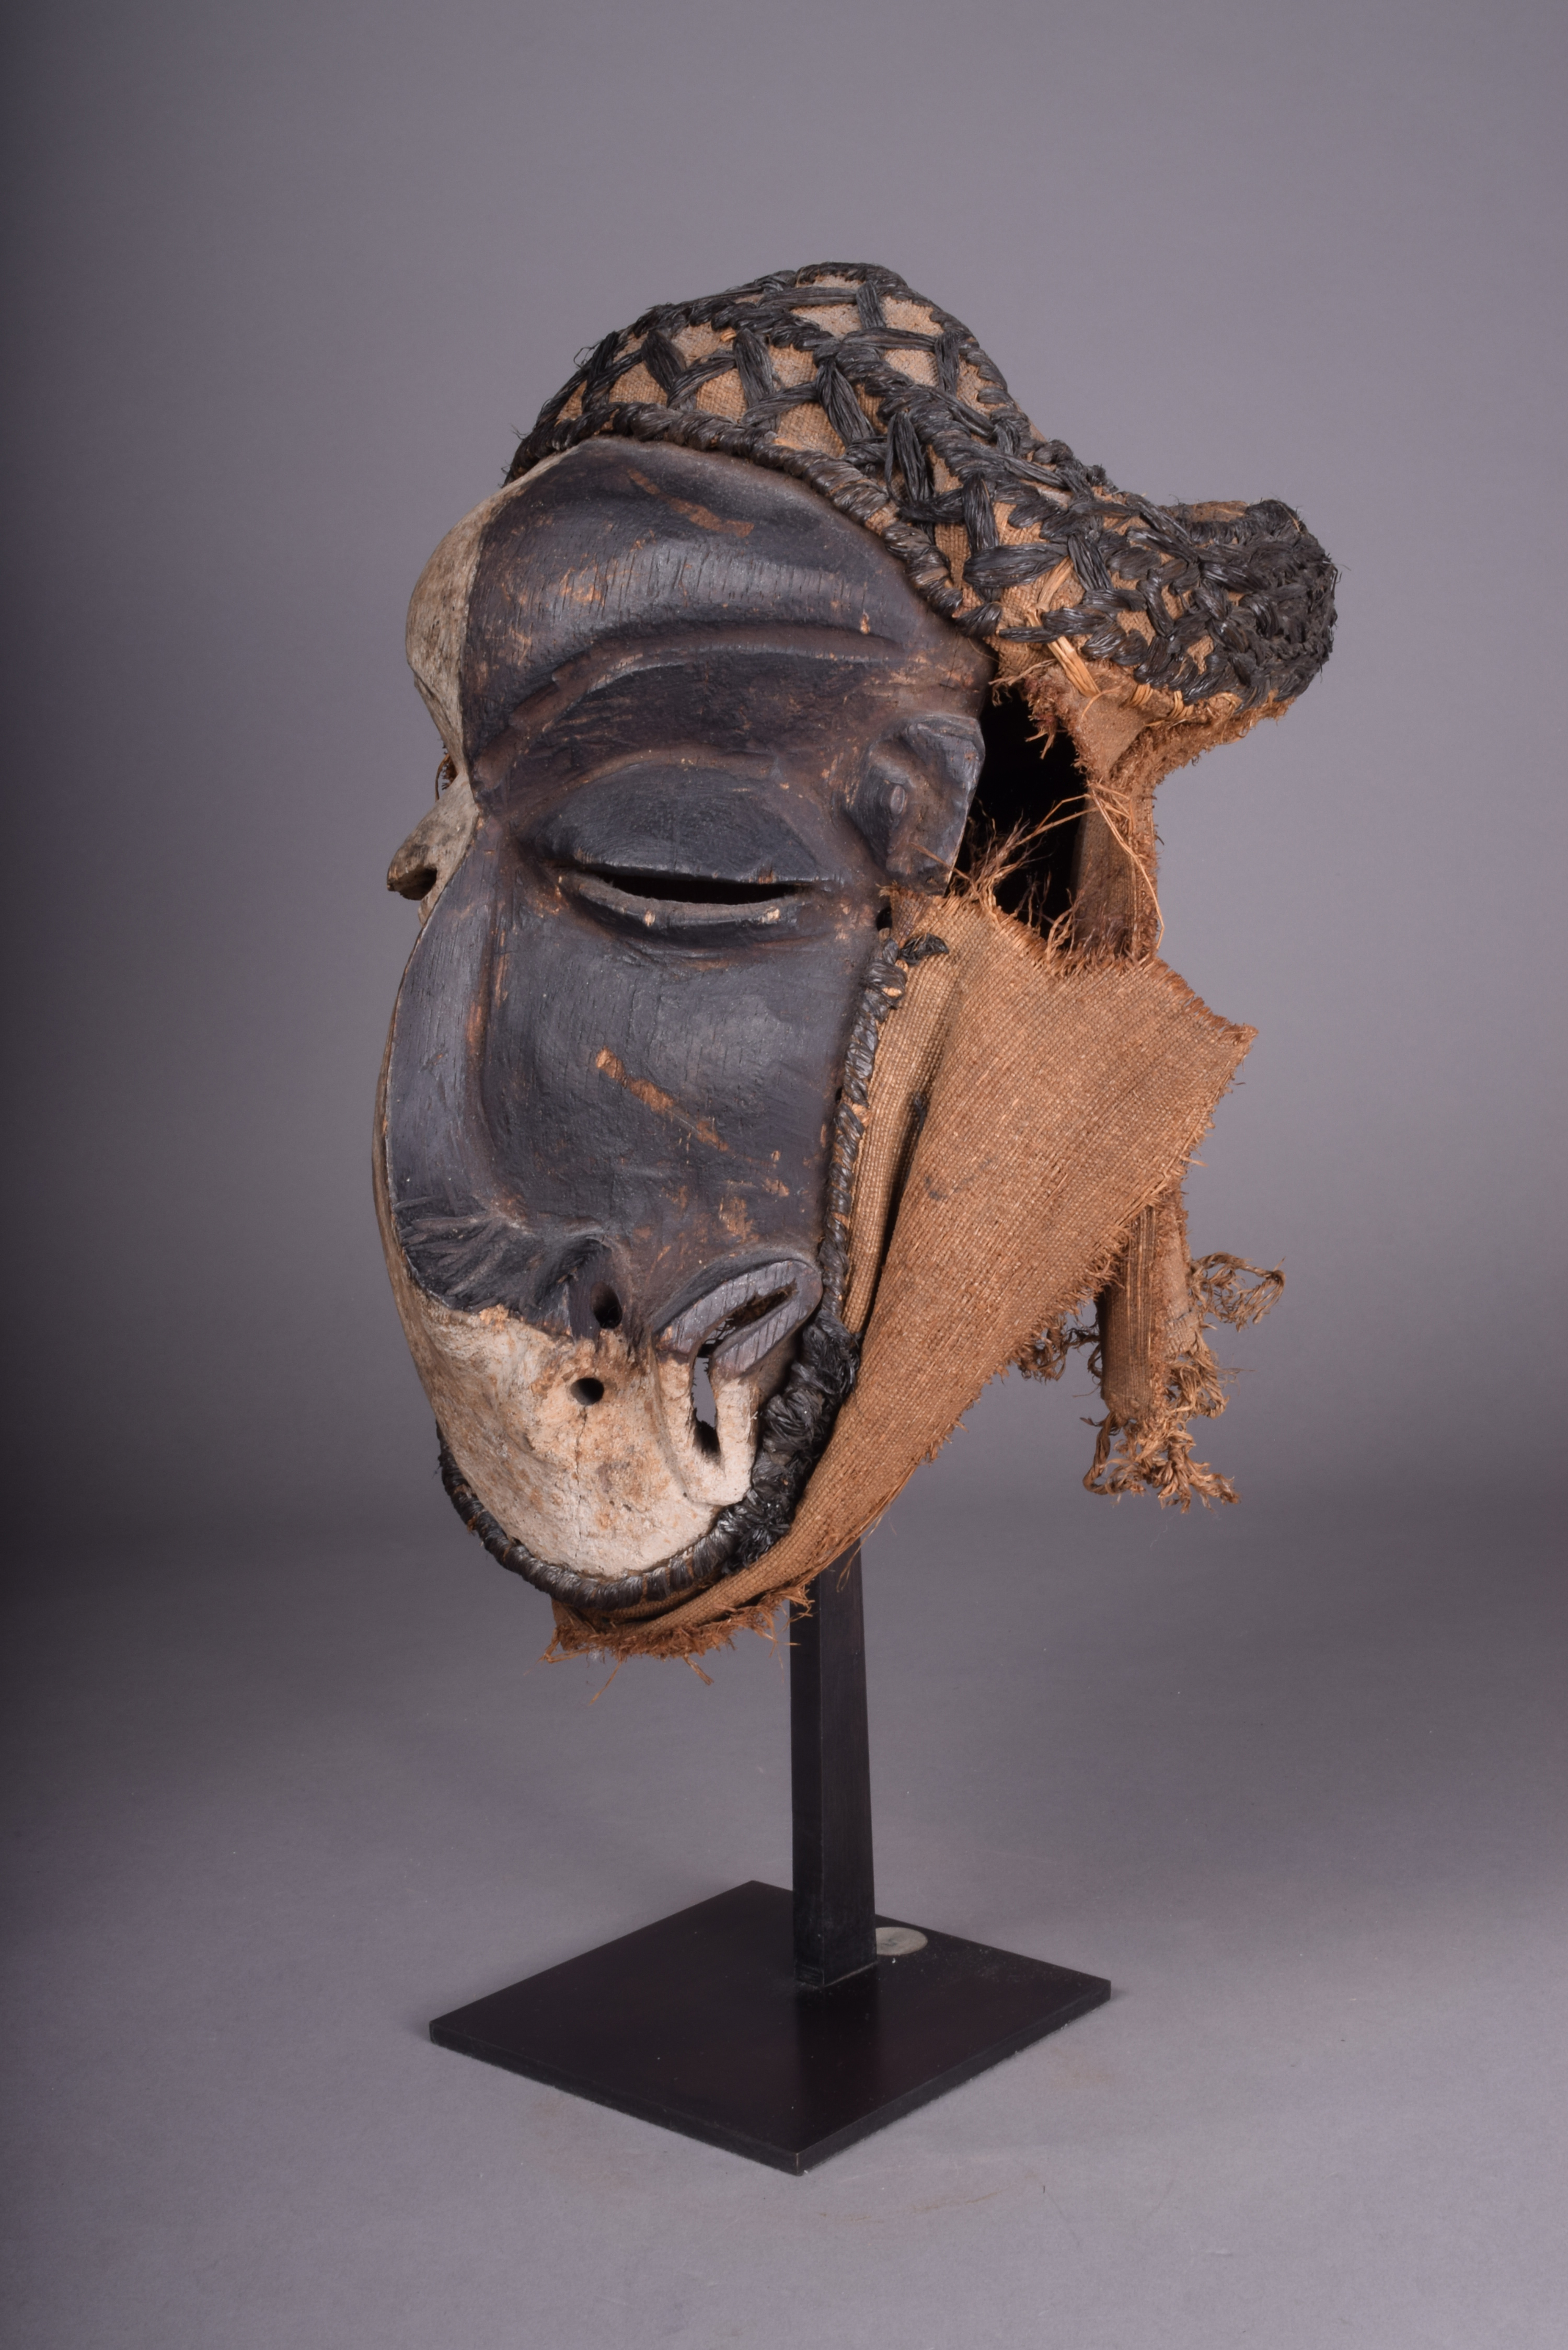 A Pende sickness mask D.R.Congo with a distorted face and with white and black pigment with fibre - Image 3 of 4